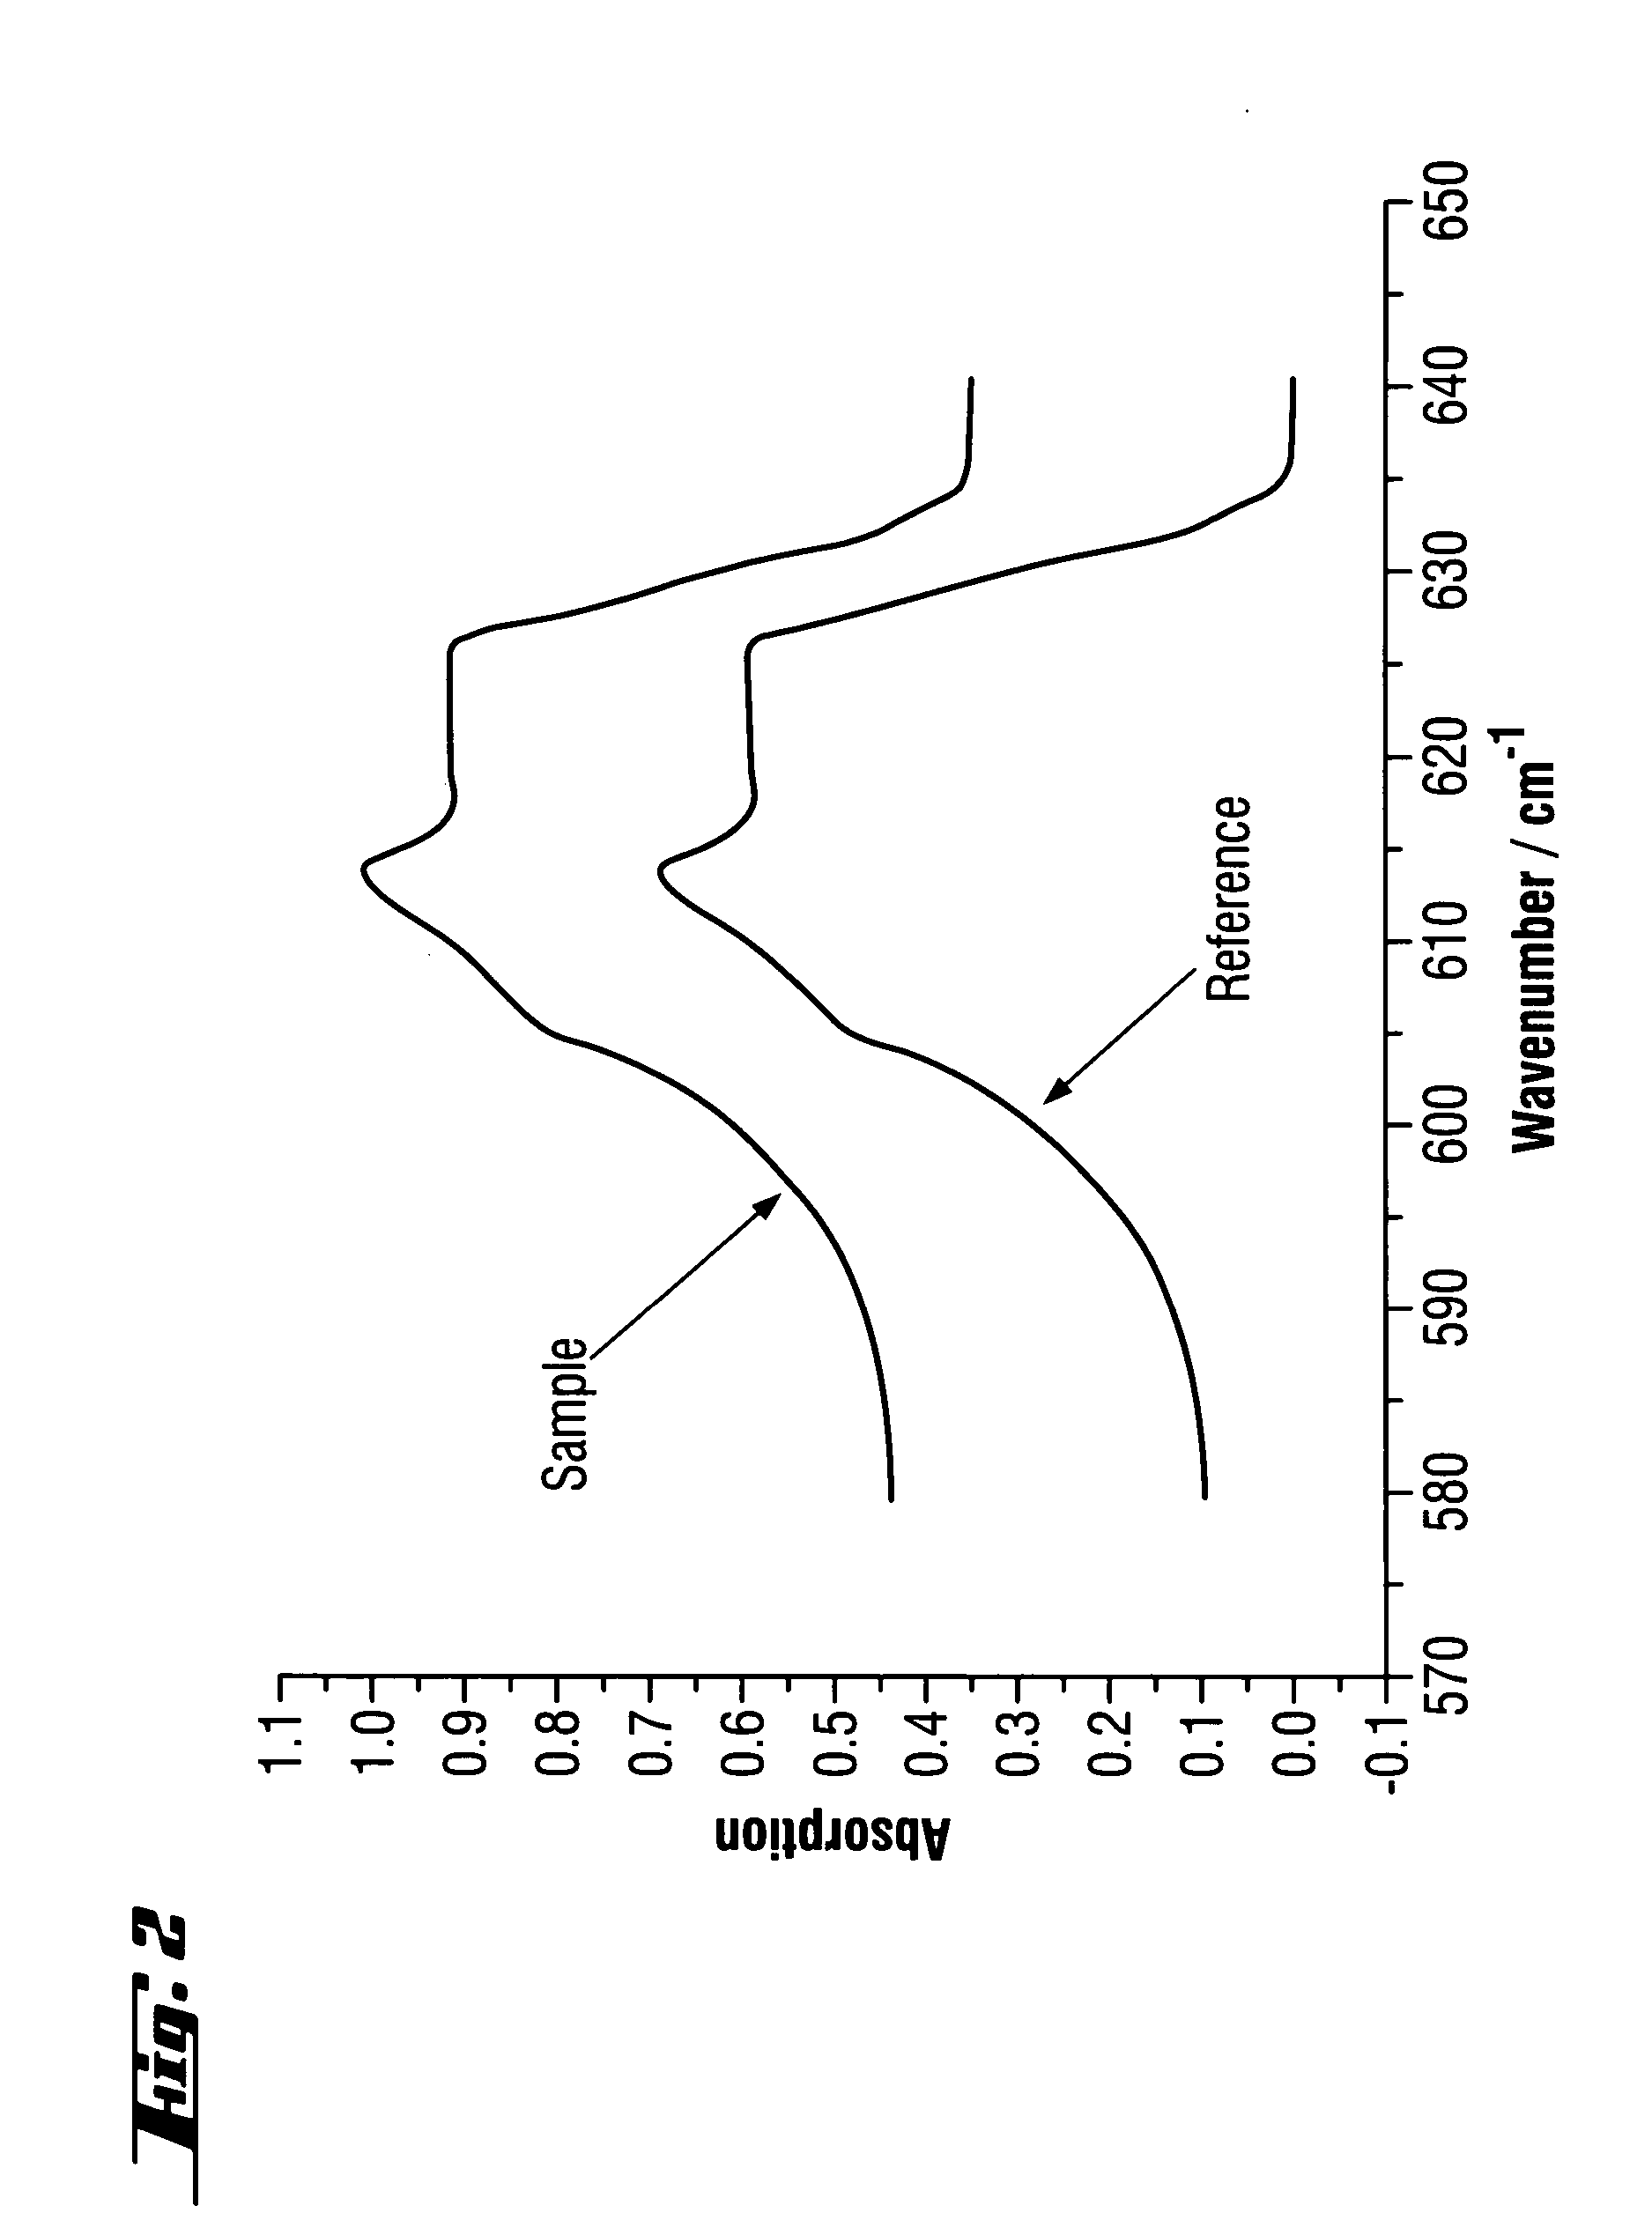 Method for determining the substitutional carbon content in monocrystalline or polycrystalline silicon